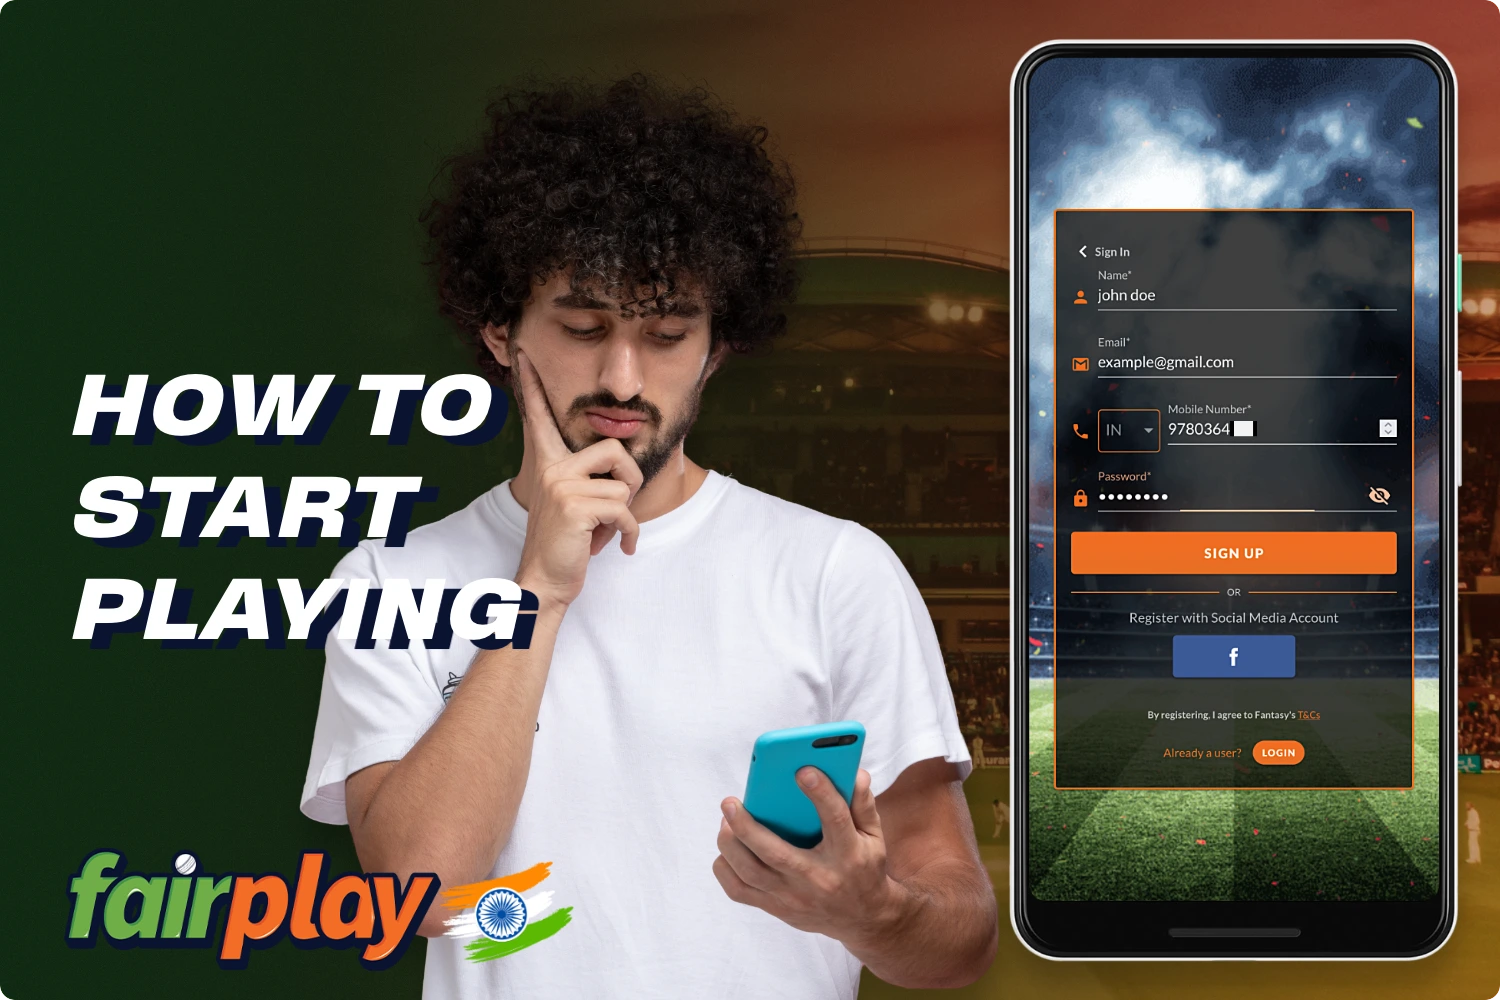 In order to start betting on Fantasy sports at Fairplay you need to follow a few simple steps